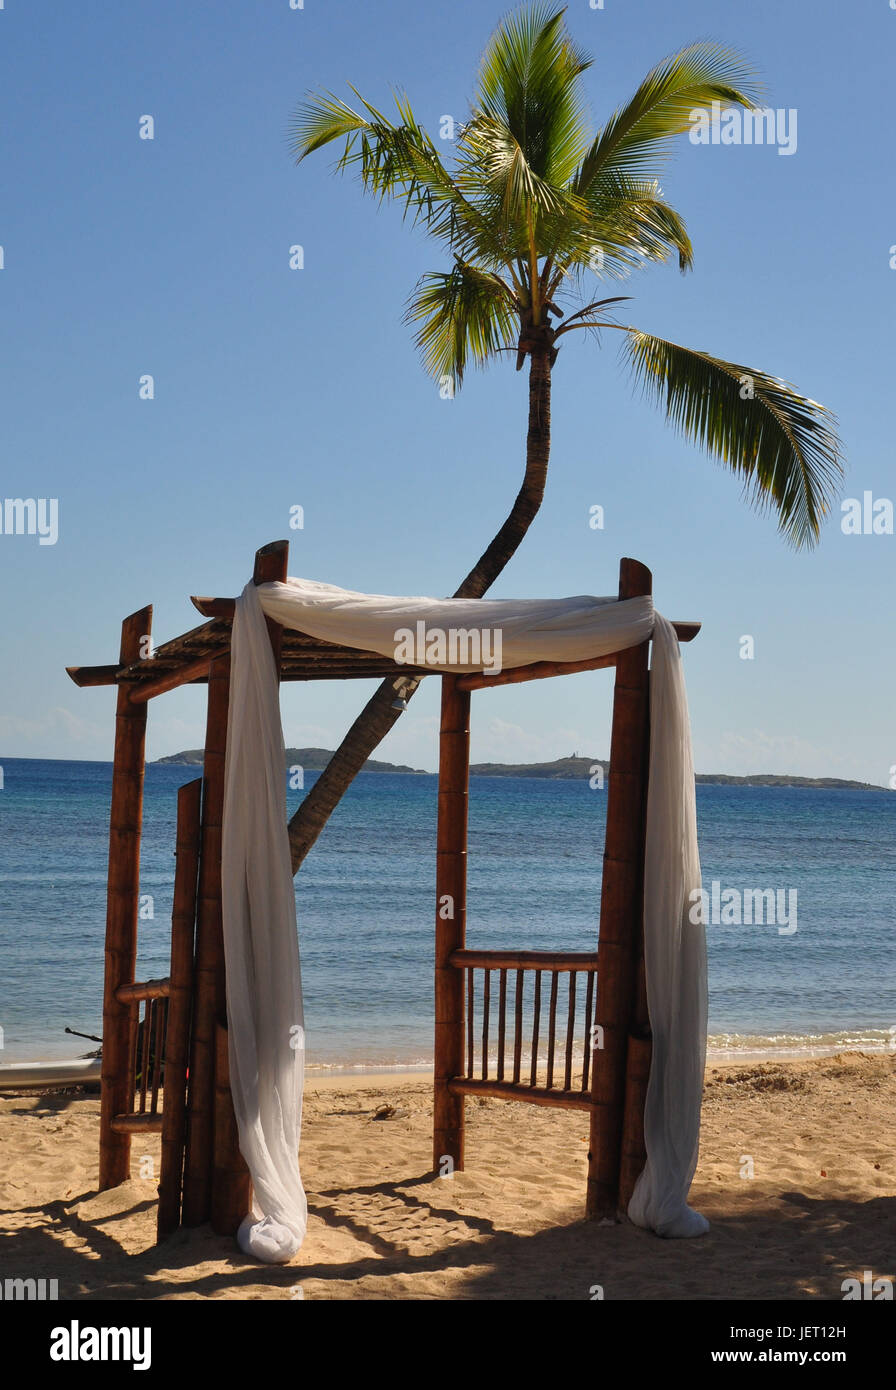 Wedding Arbor draped in white fabric located on the beach with a palm tree behind it. Stock Photo